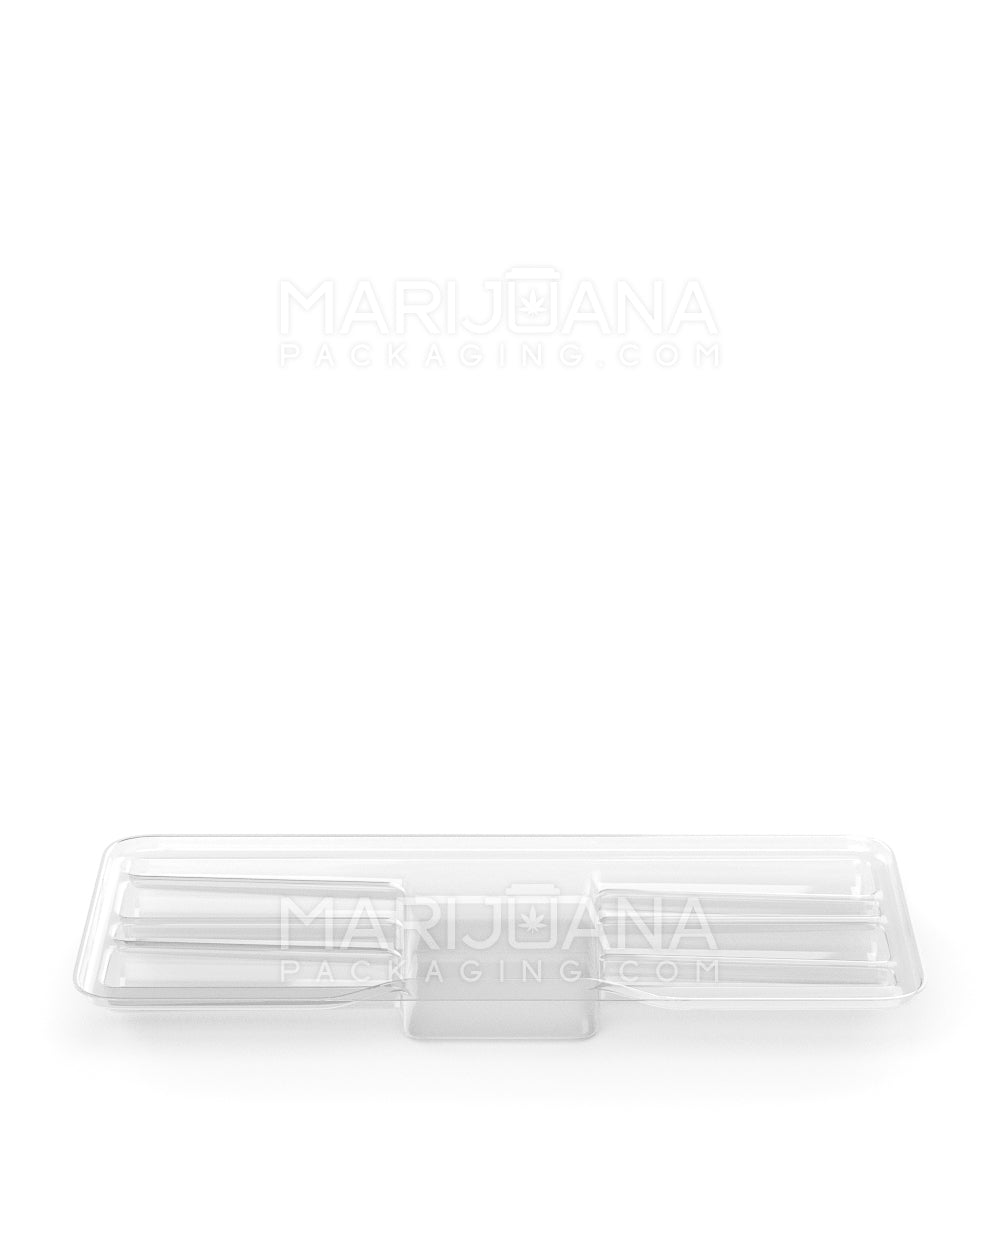 Edible & Joint Box Insert Tray for 4 King Size Pre Rolled Cones | 109mm - Clear Plastic - 100 Count - 5